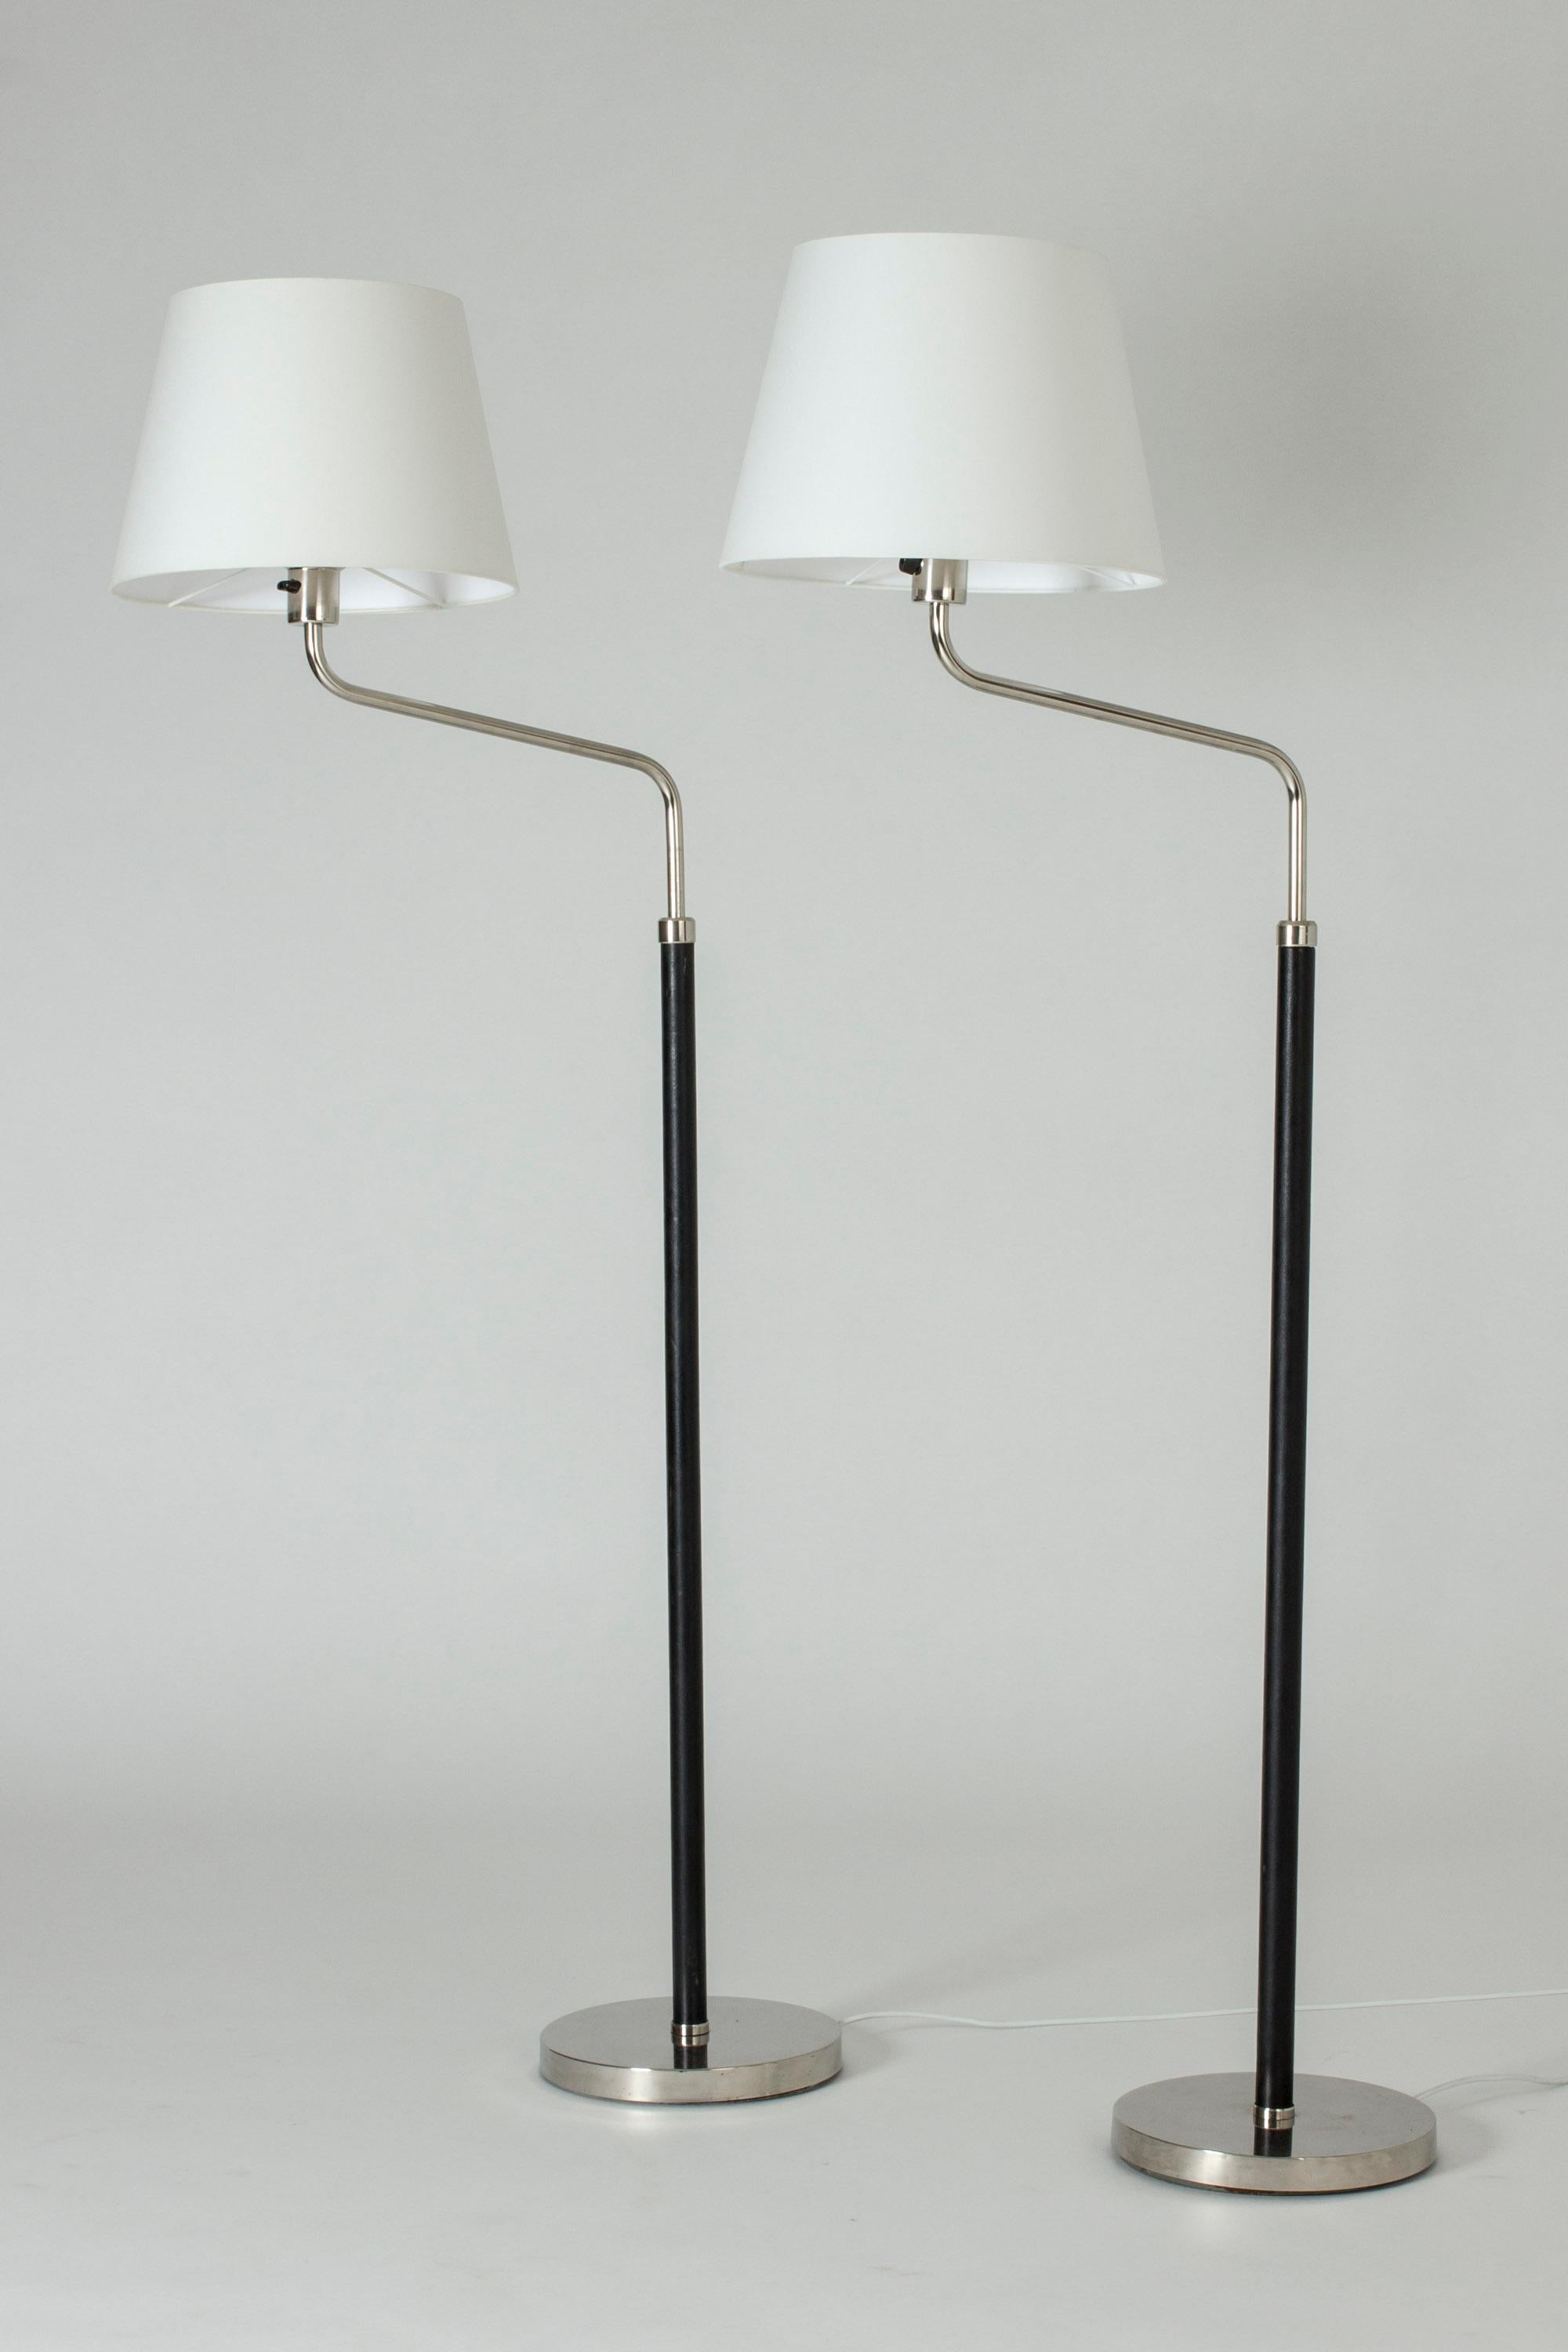 Pair of cool functionalist floor lamps by Bertil Brisborg. Made from steel with leather dressed poles.